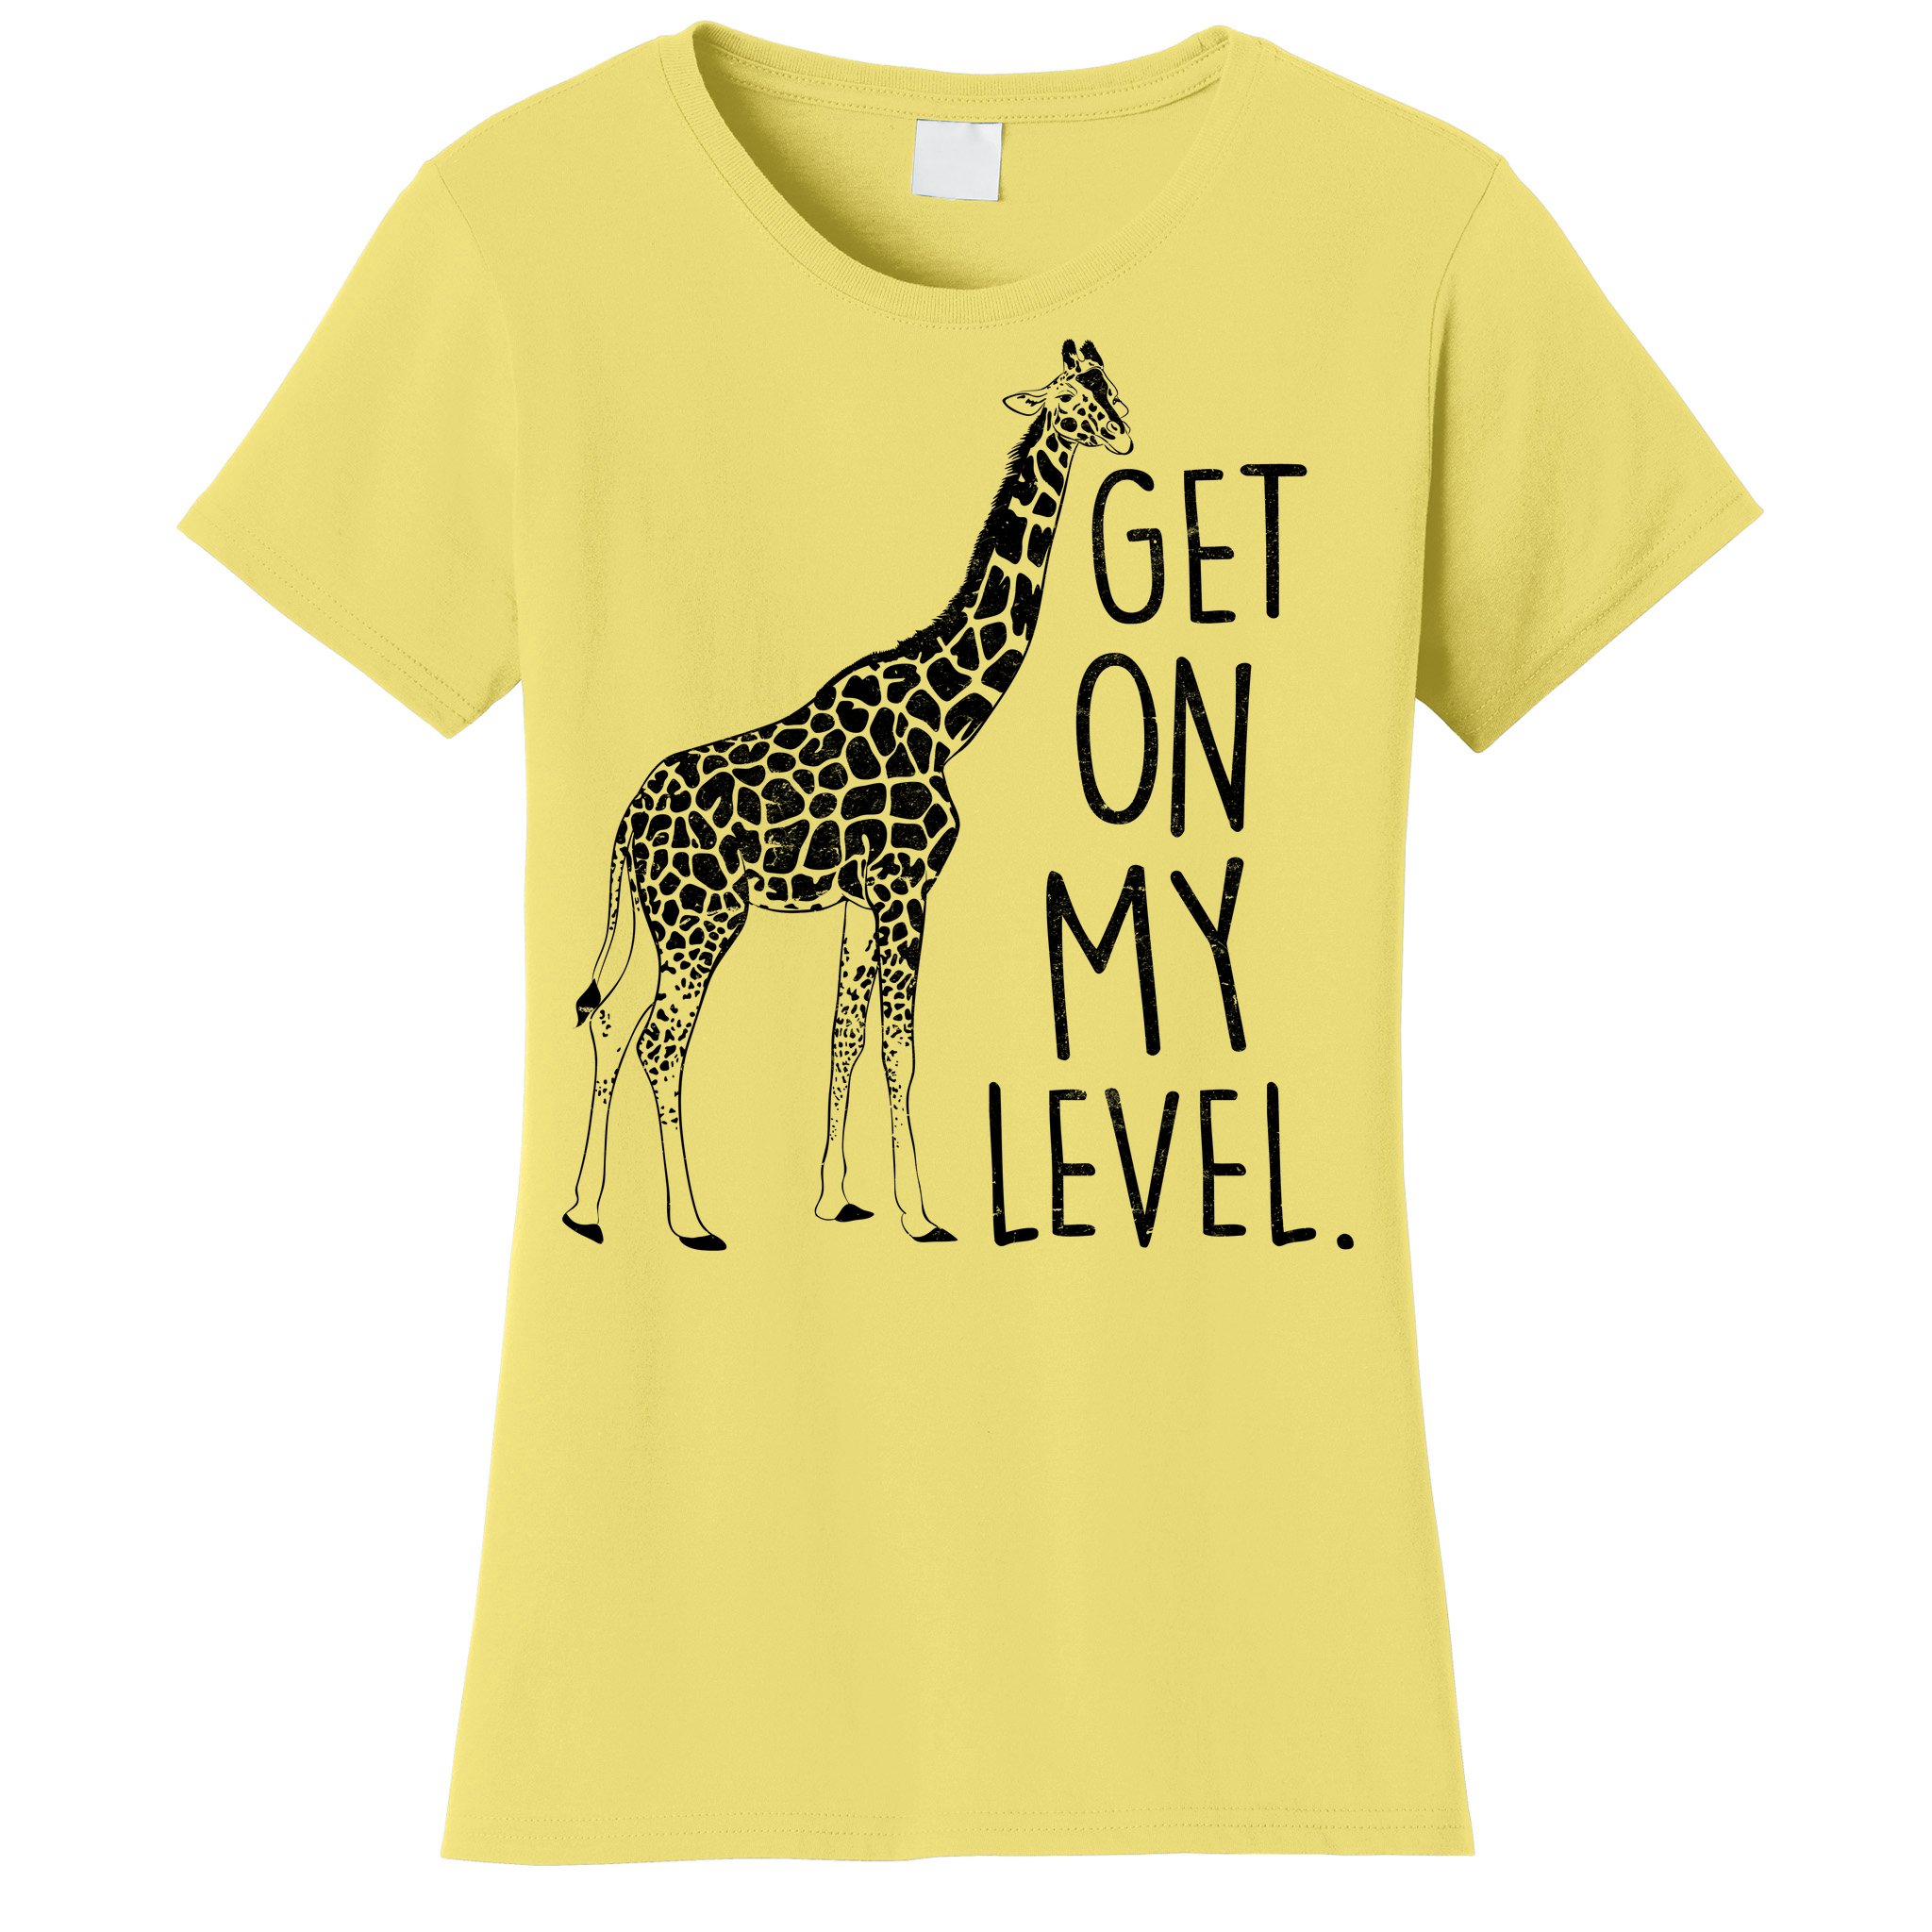 Giraffe You Are Not on My Level T-Shirt